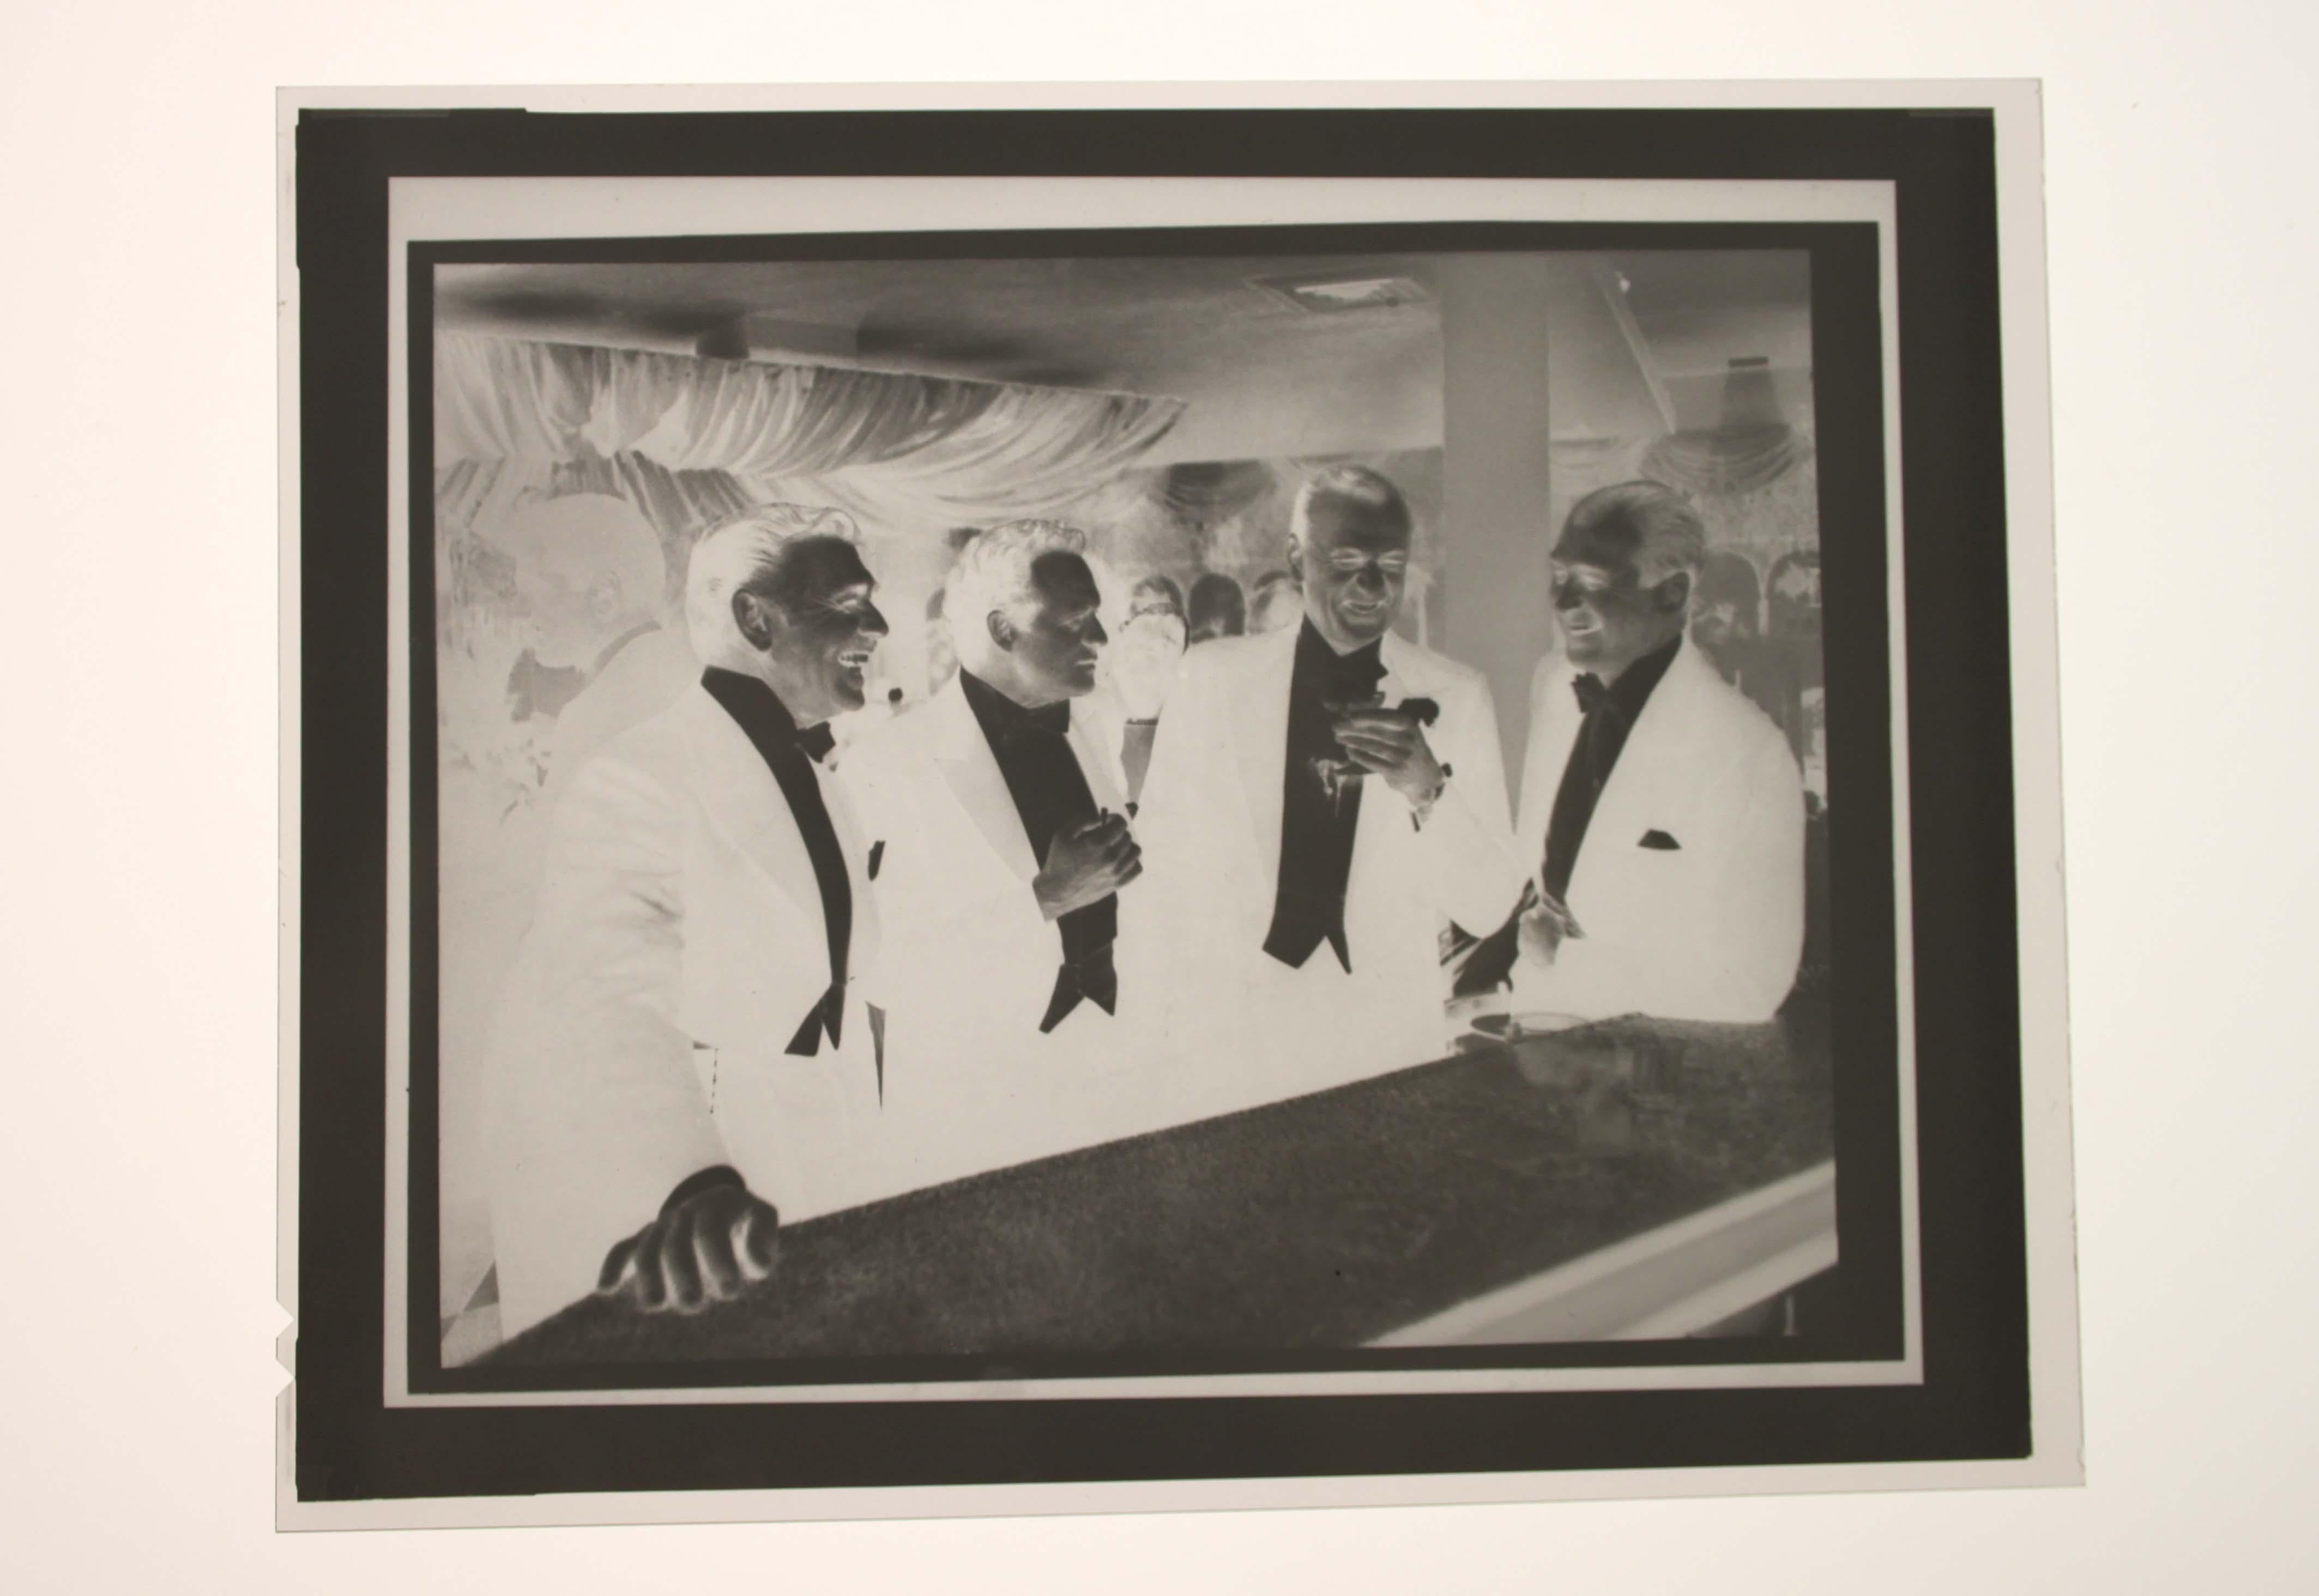 ‘Kings of Hollywood’ from 1957, is a signature post-war era photograph by American photographer Slim Aarons (1916-2006) capturing Classic Hollywood stars of the golden age.

Here Clark Gable, Van Heflin, Gary Cooper, and James Stewart enjoy a joke